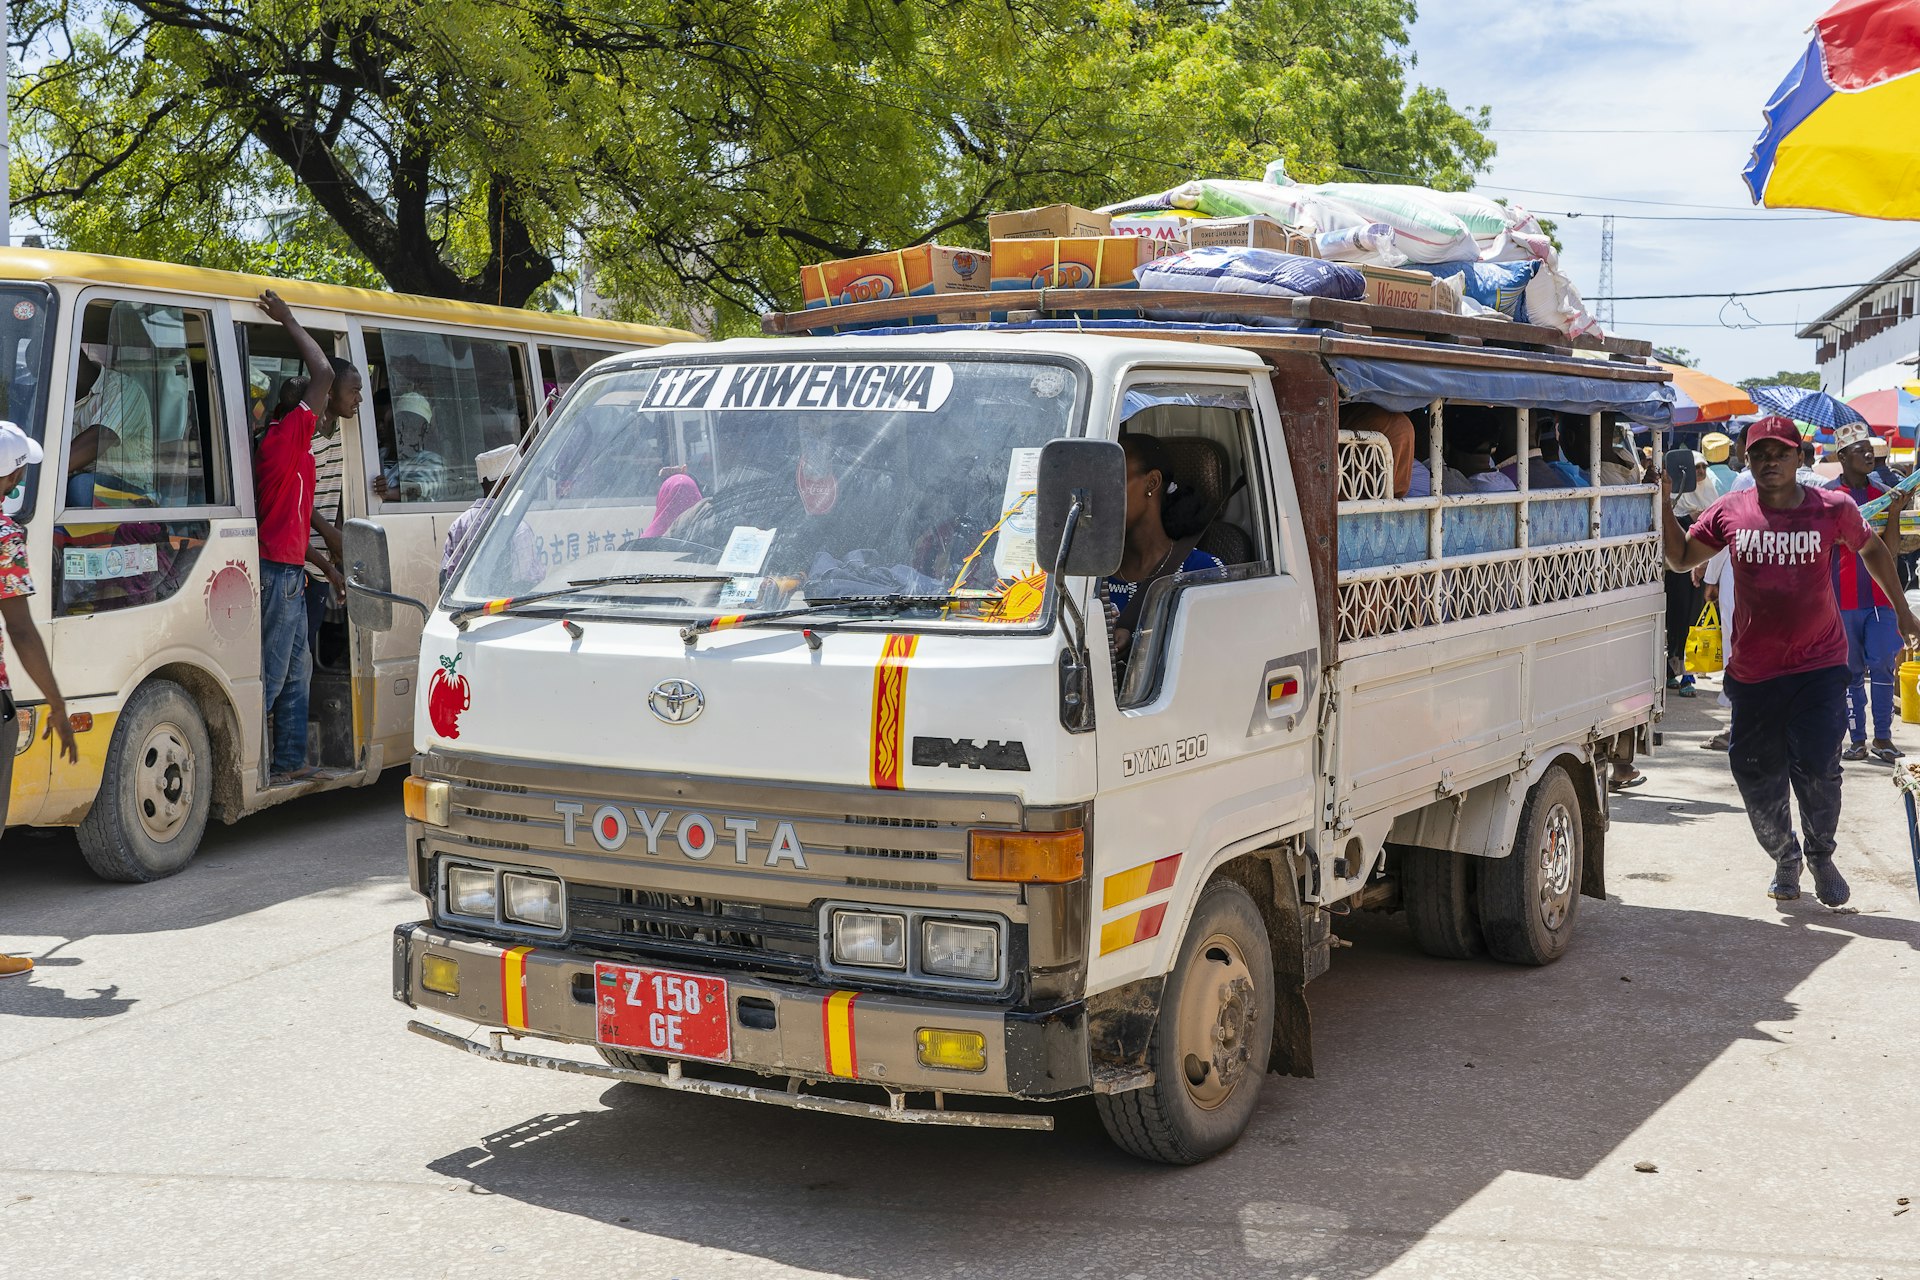 A Dala dala bus, on the streets of Tanzania, alongside more public transport, with passengers and pedestrians in the background